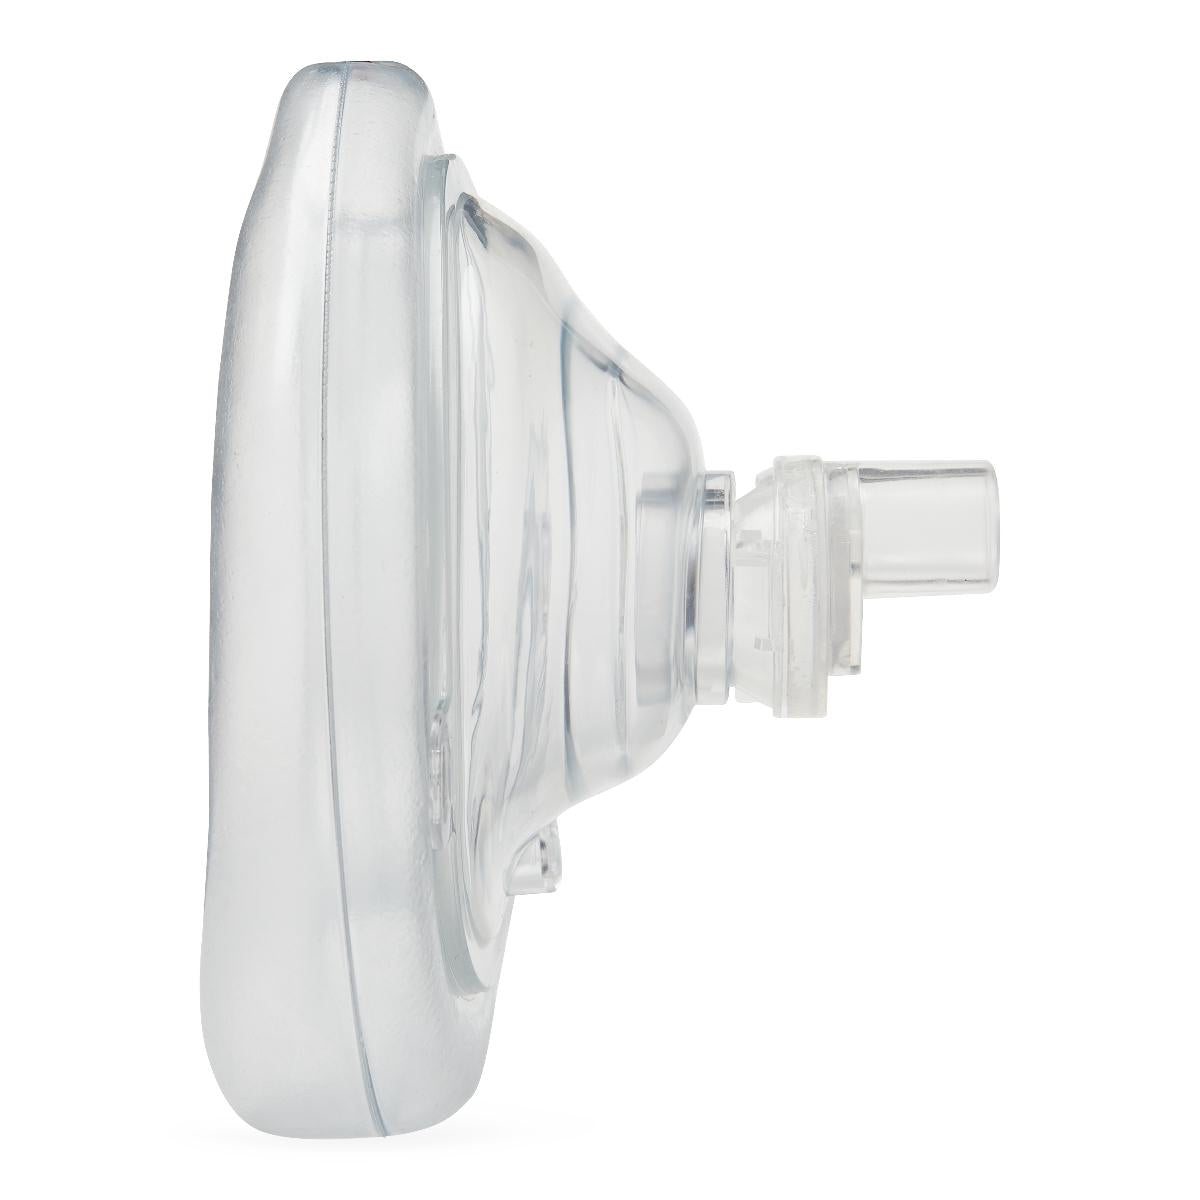 Mouth-To-Mask Resuscitator with Valve